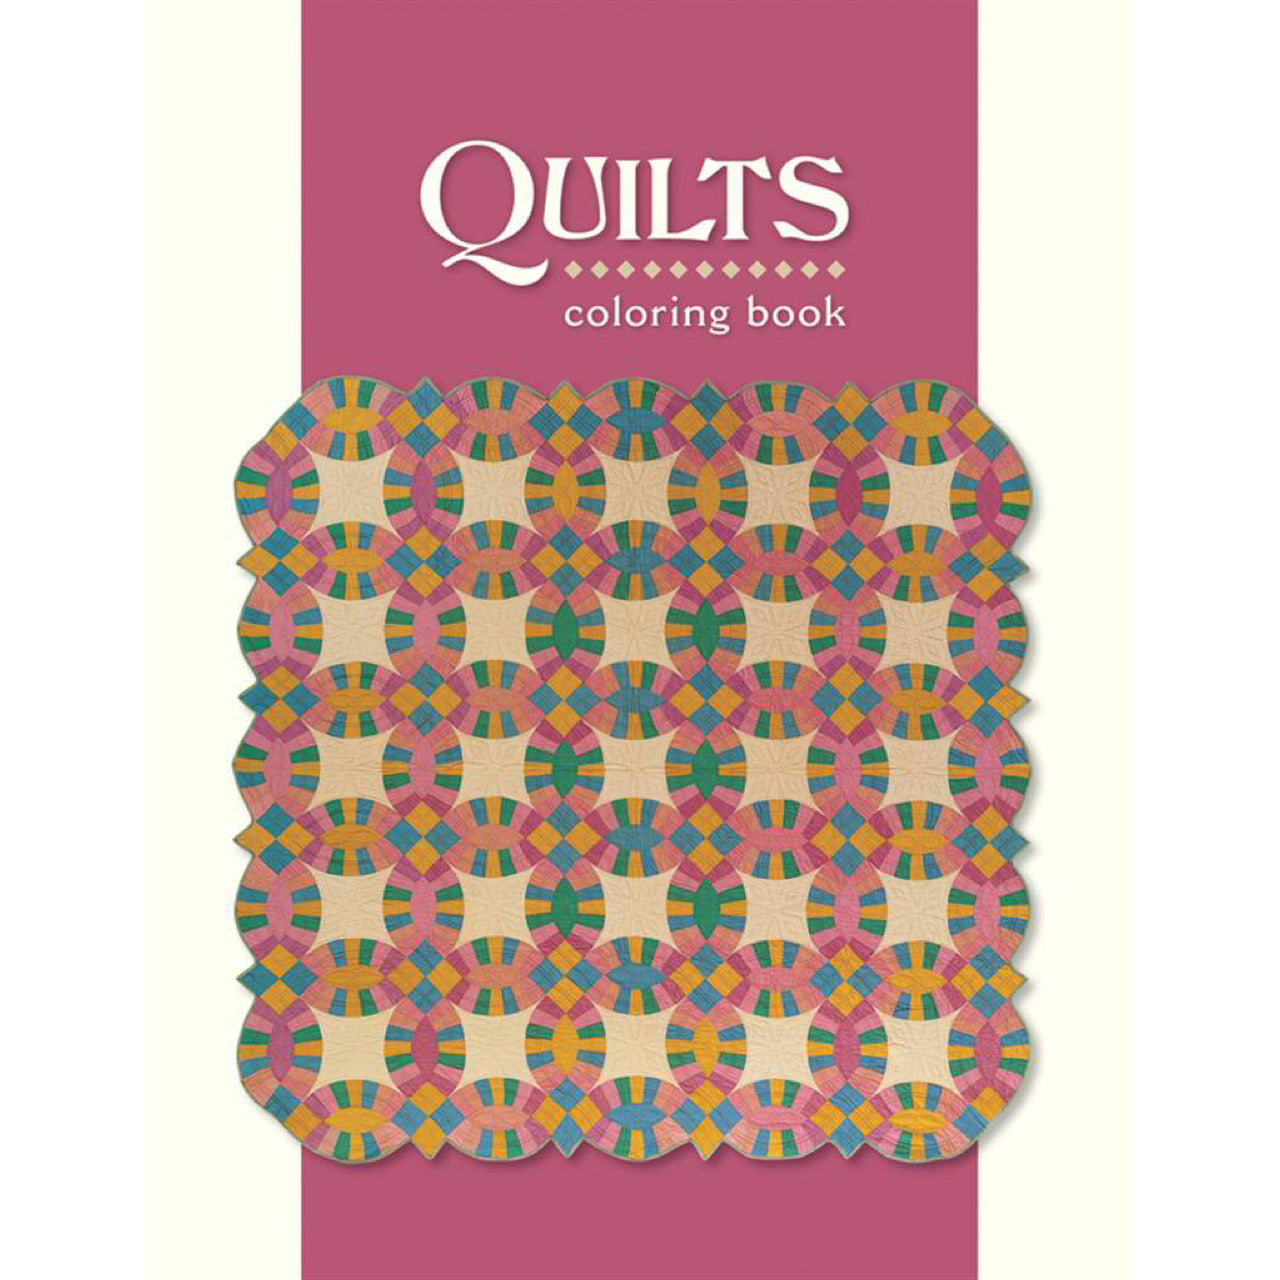 Quilts - Coloring Book